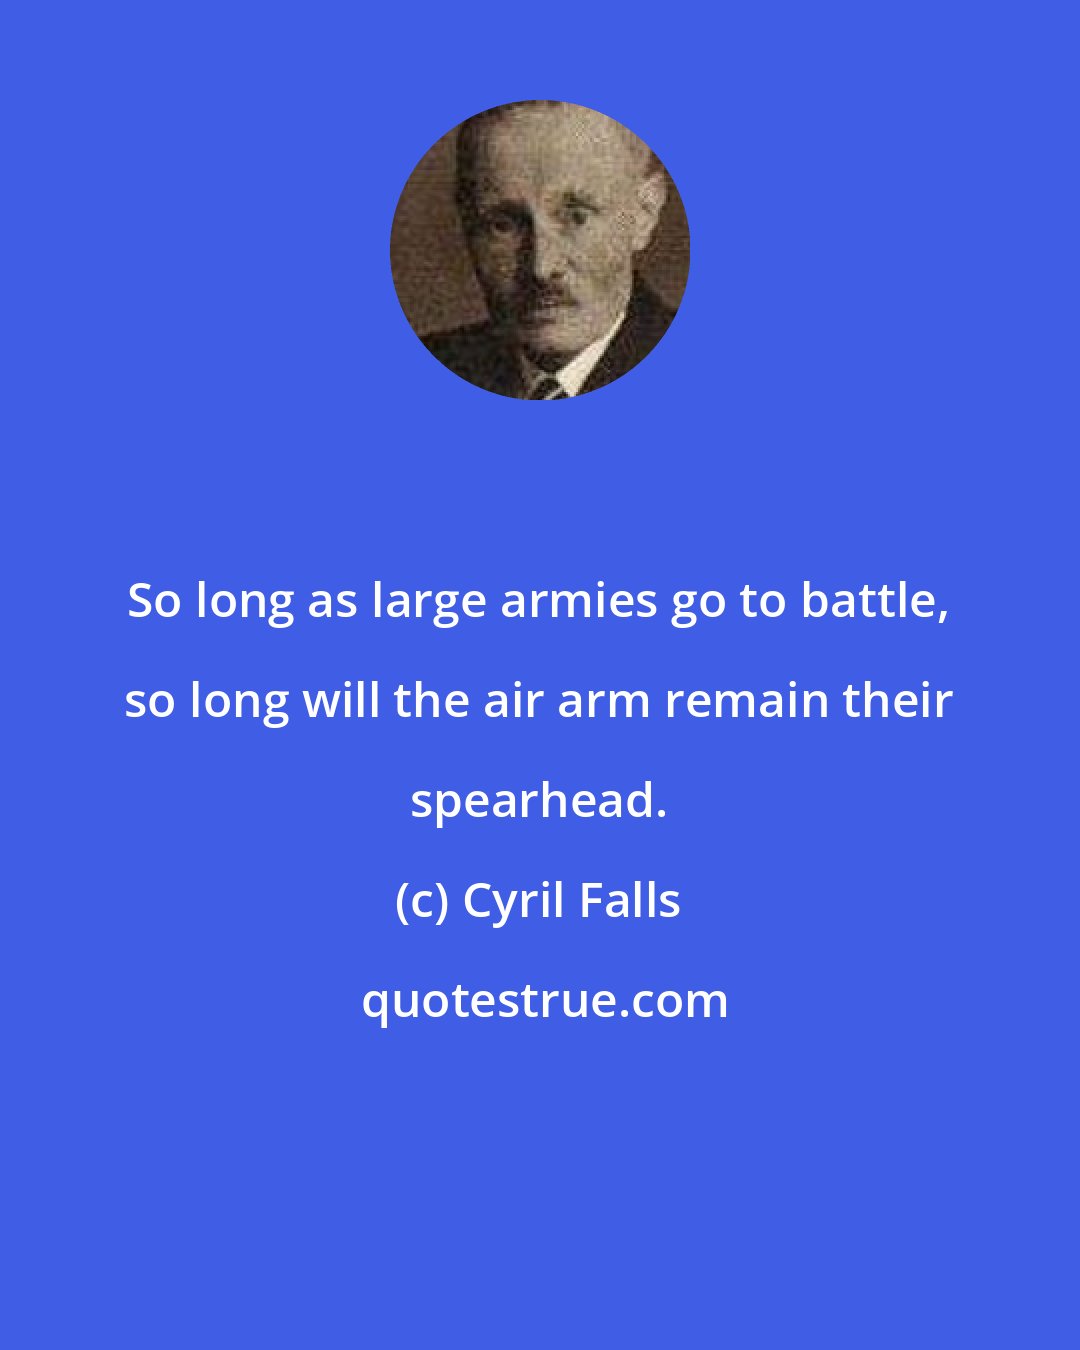 Cyril Falls: So long as large armies go to battle, so long will the air arm remain their spearhead.